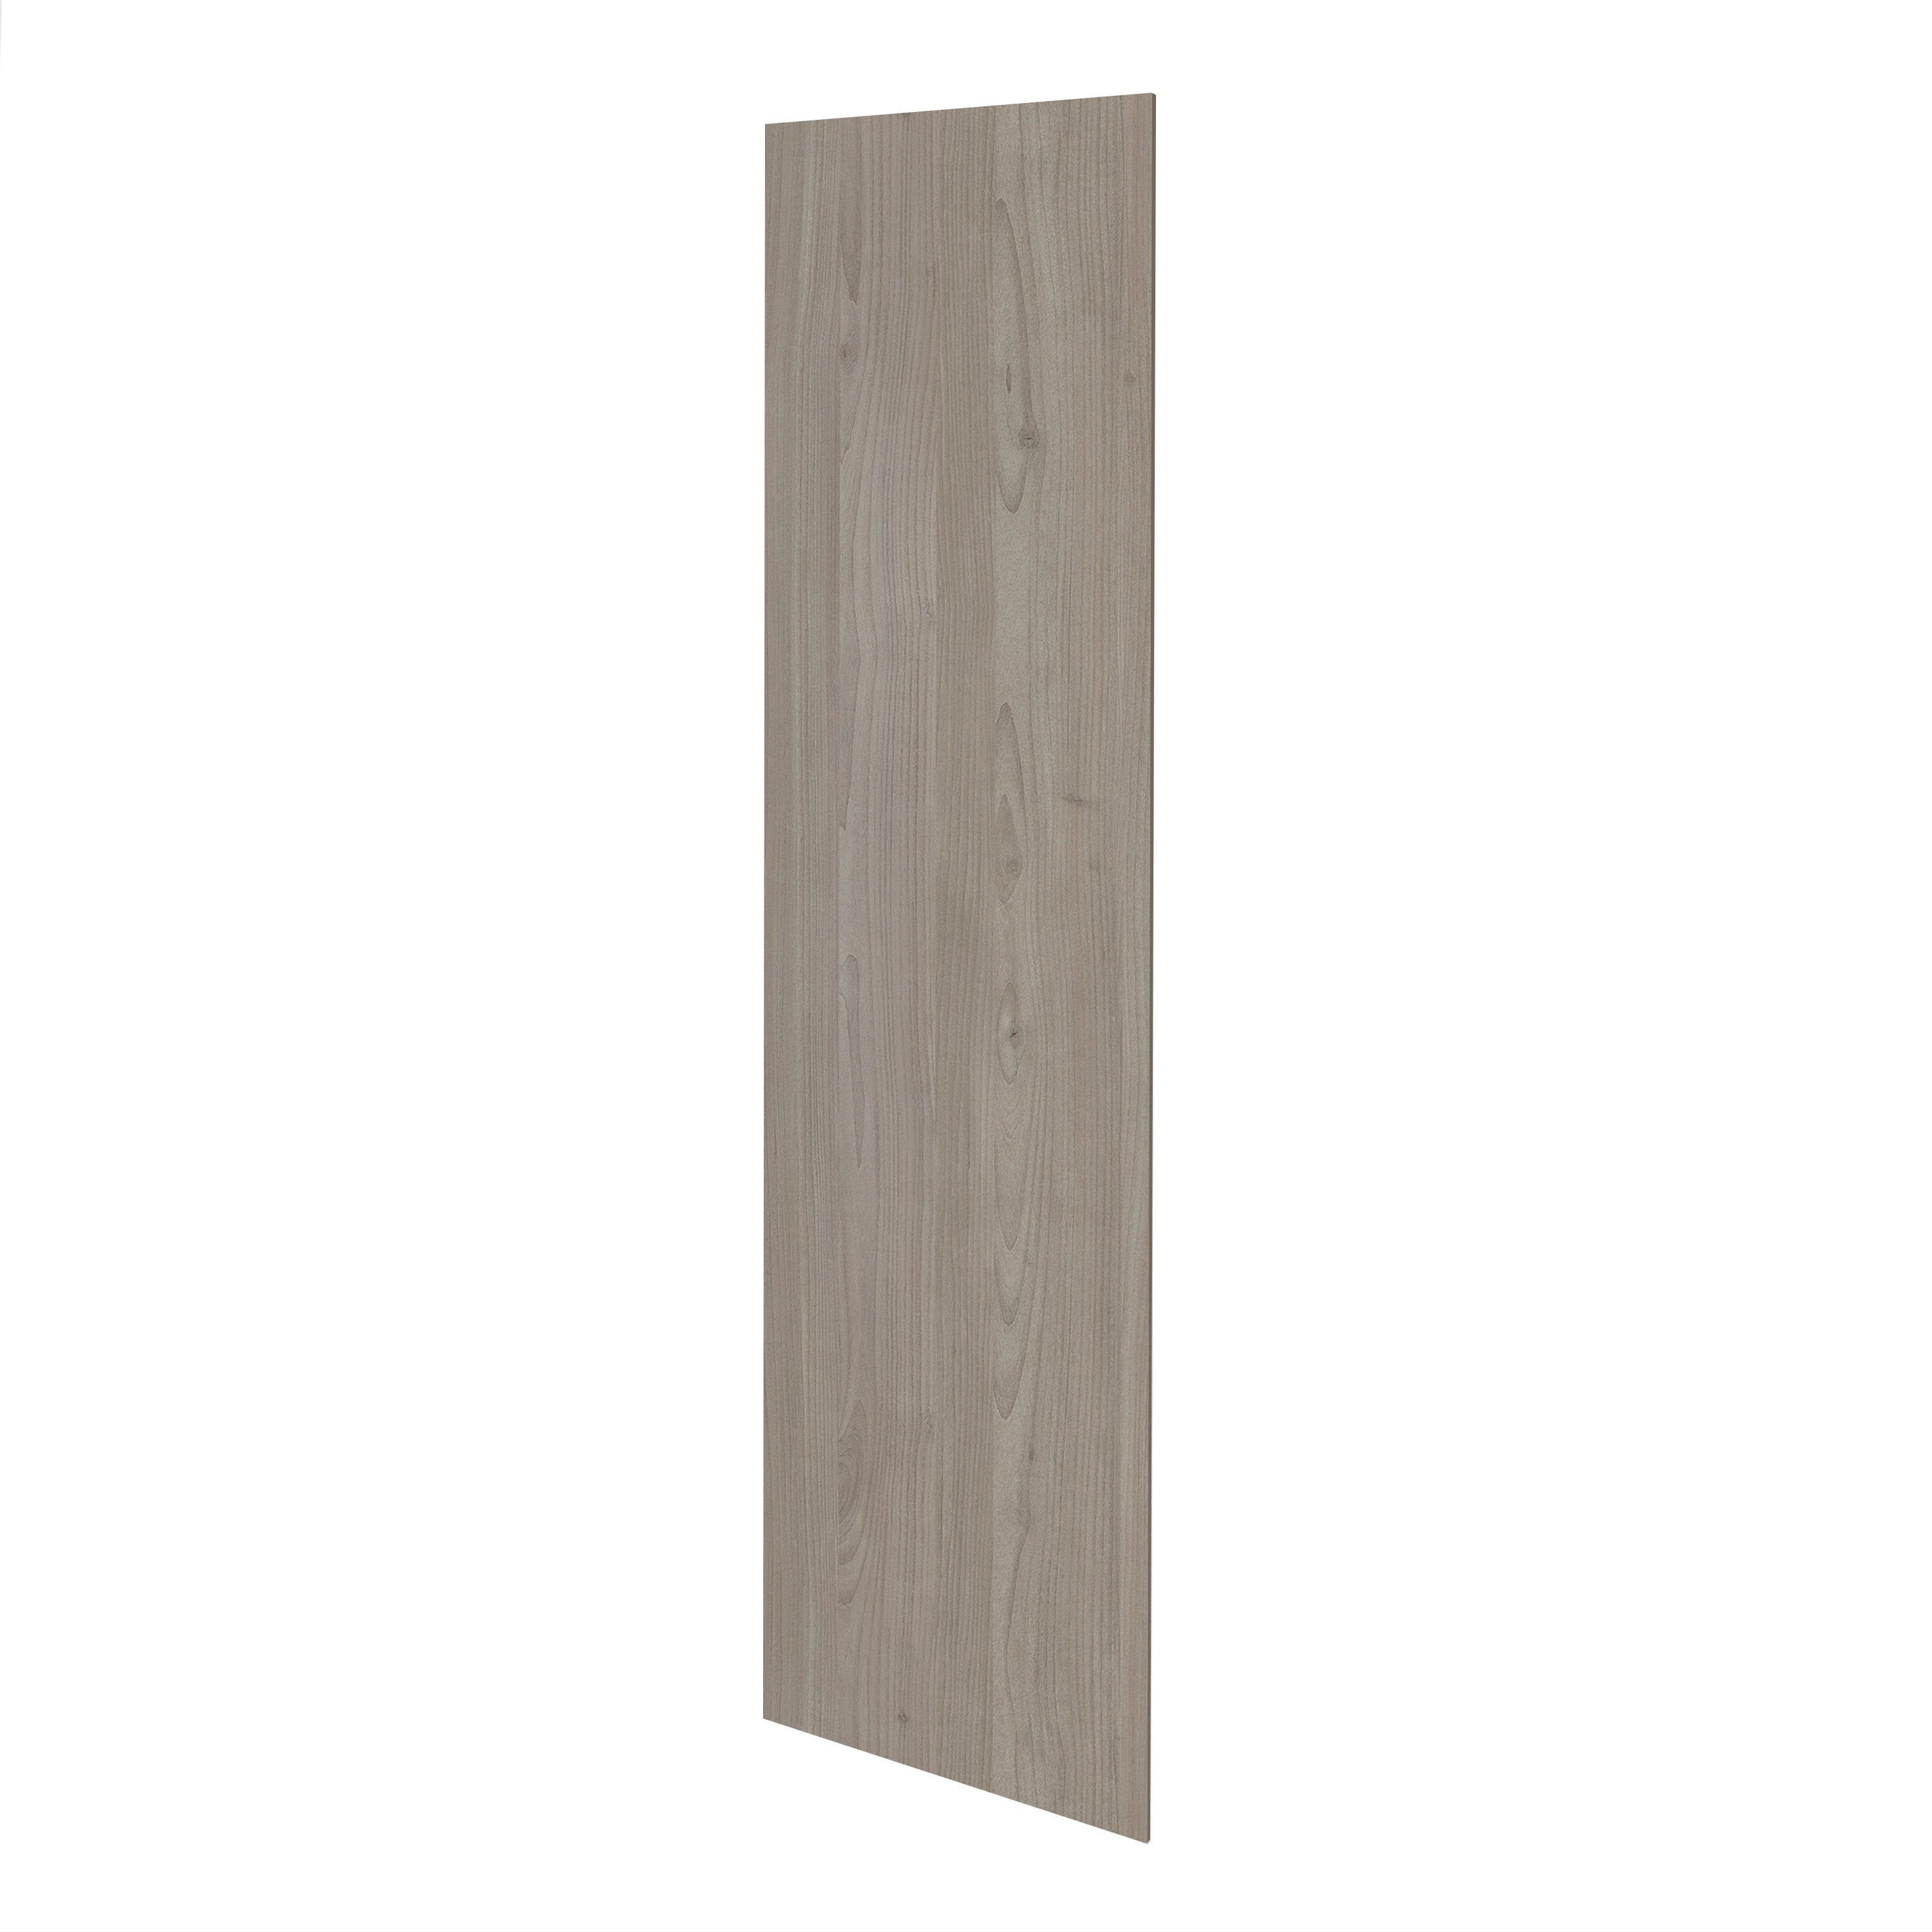 Grey Nordic Slab Style Pantry Kitchen Cabinet End Panel (24 in W x 0.75 in D x 90 in H)